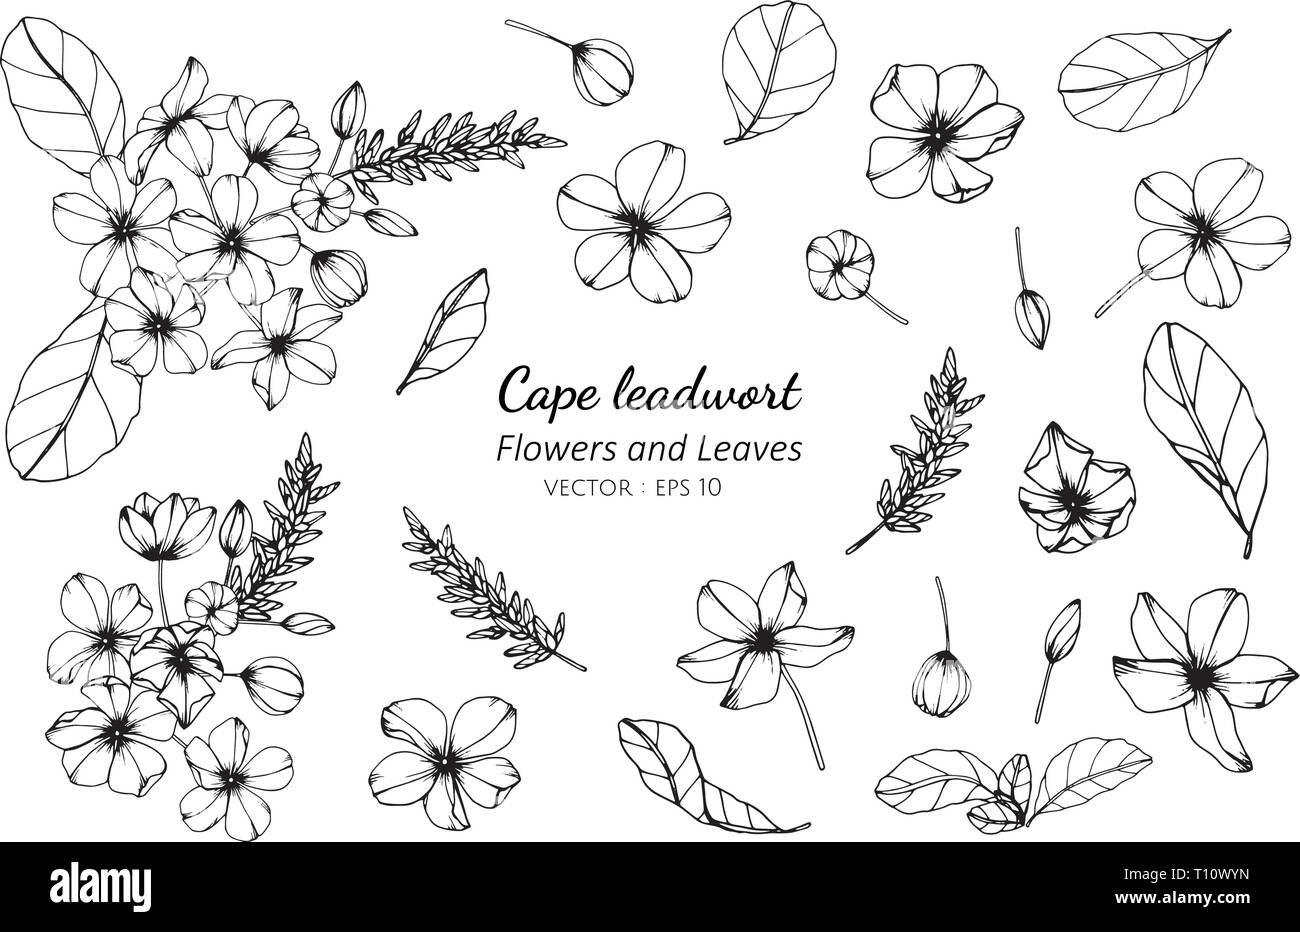 Collection set of cape leadwort flower and leaves drawing illustration. for pattern, logo, template, banner, posters, invitation and greeting card des Stock Vector